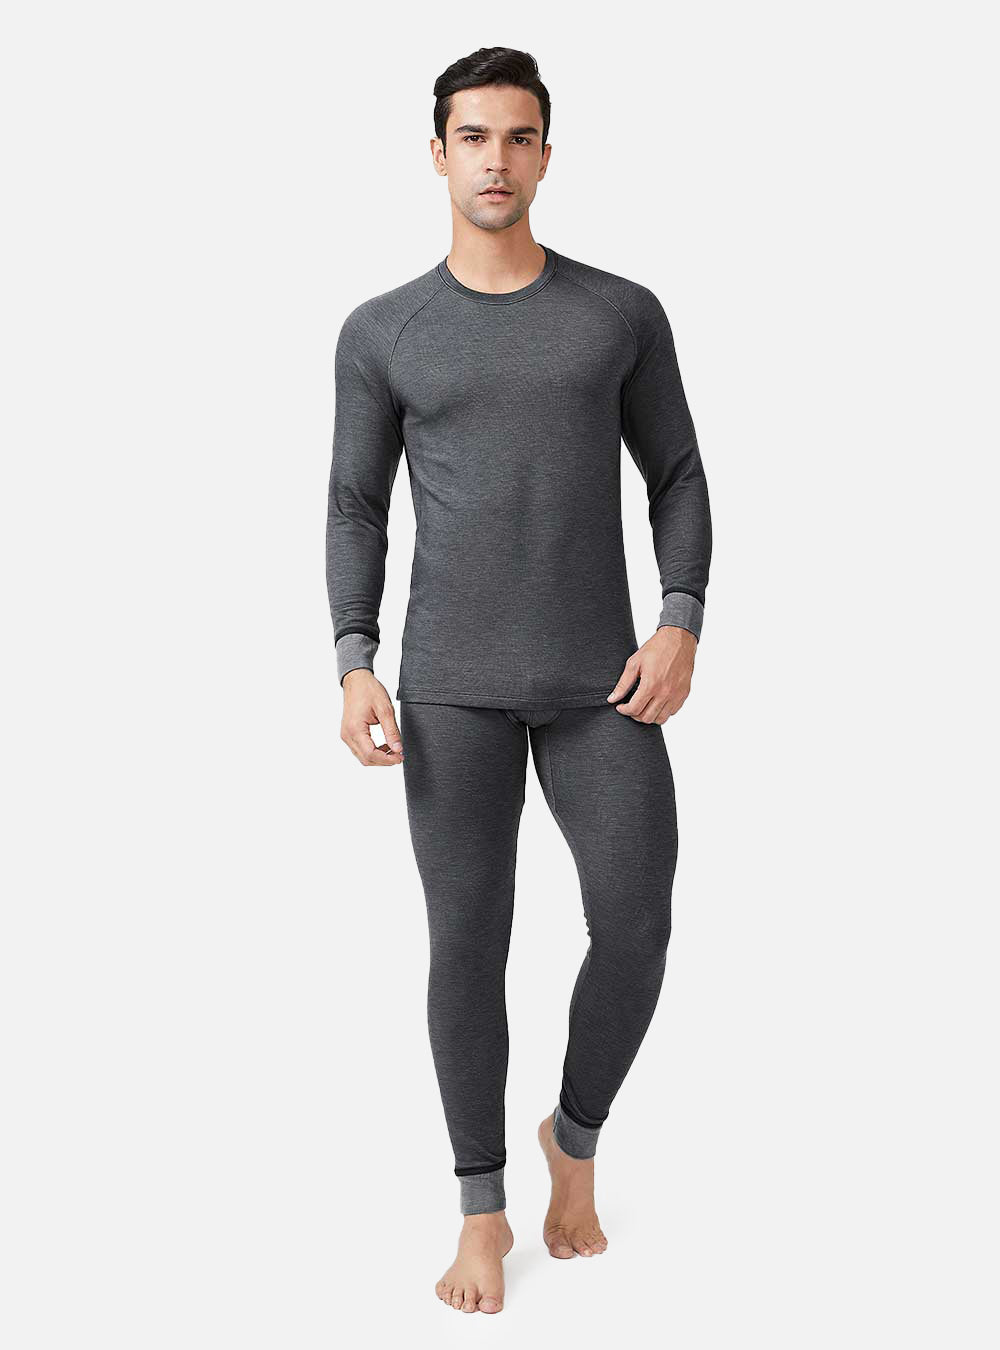 David Archy Thermal Set Cotton Double Layer Fleece Stretchy Smooth